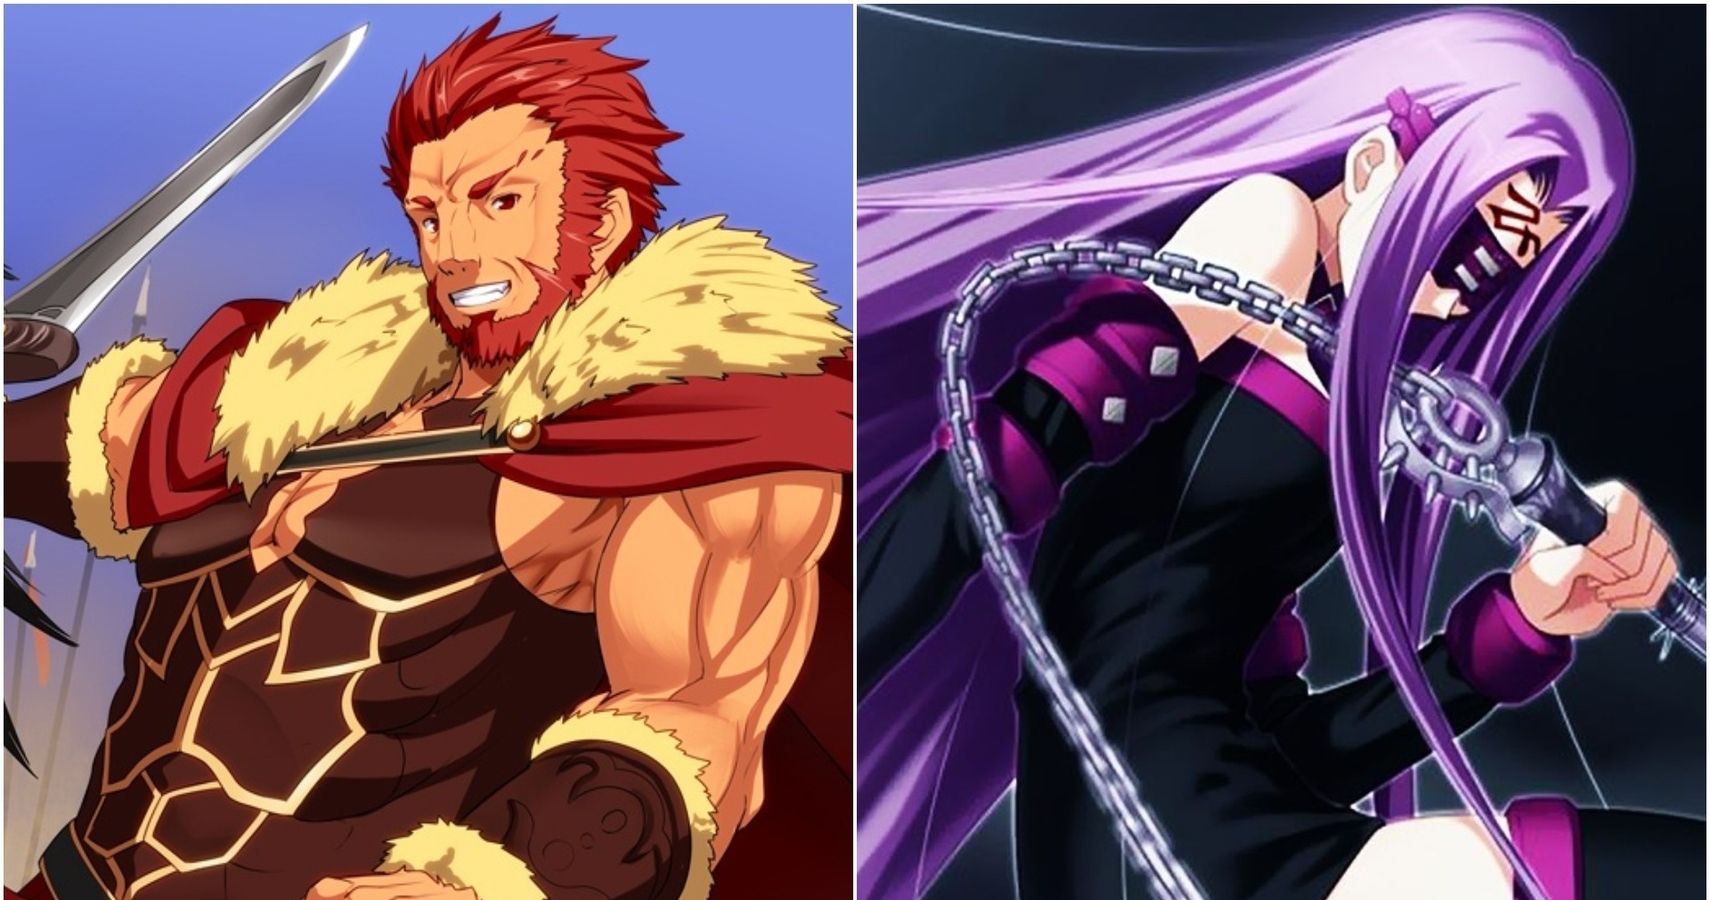 Who are the hottest characters in the Fate anime franchise? - Quora